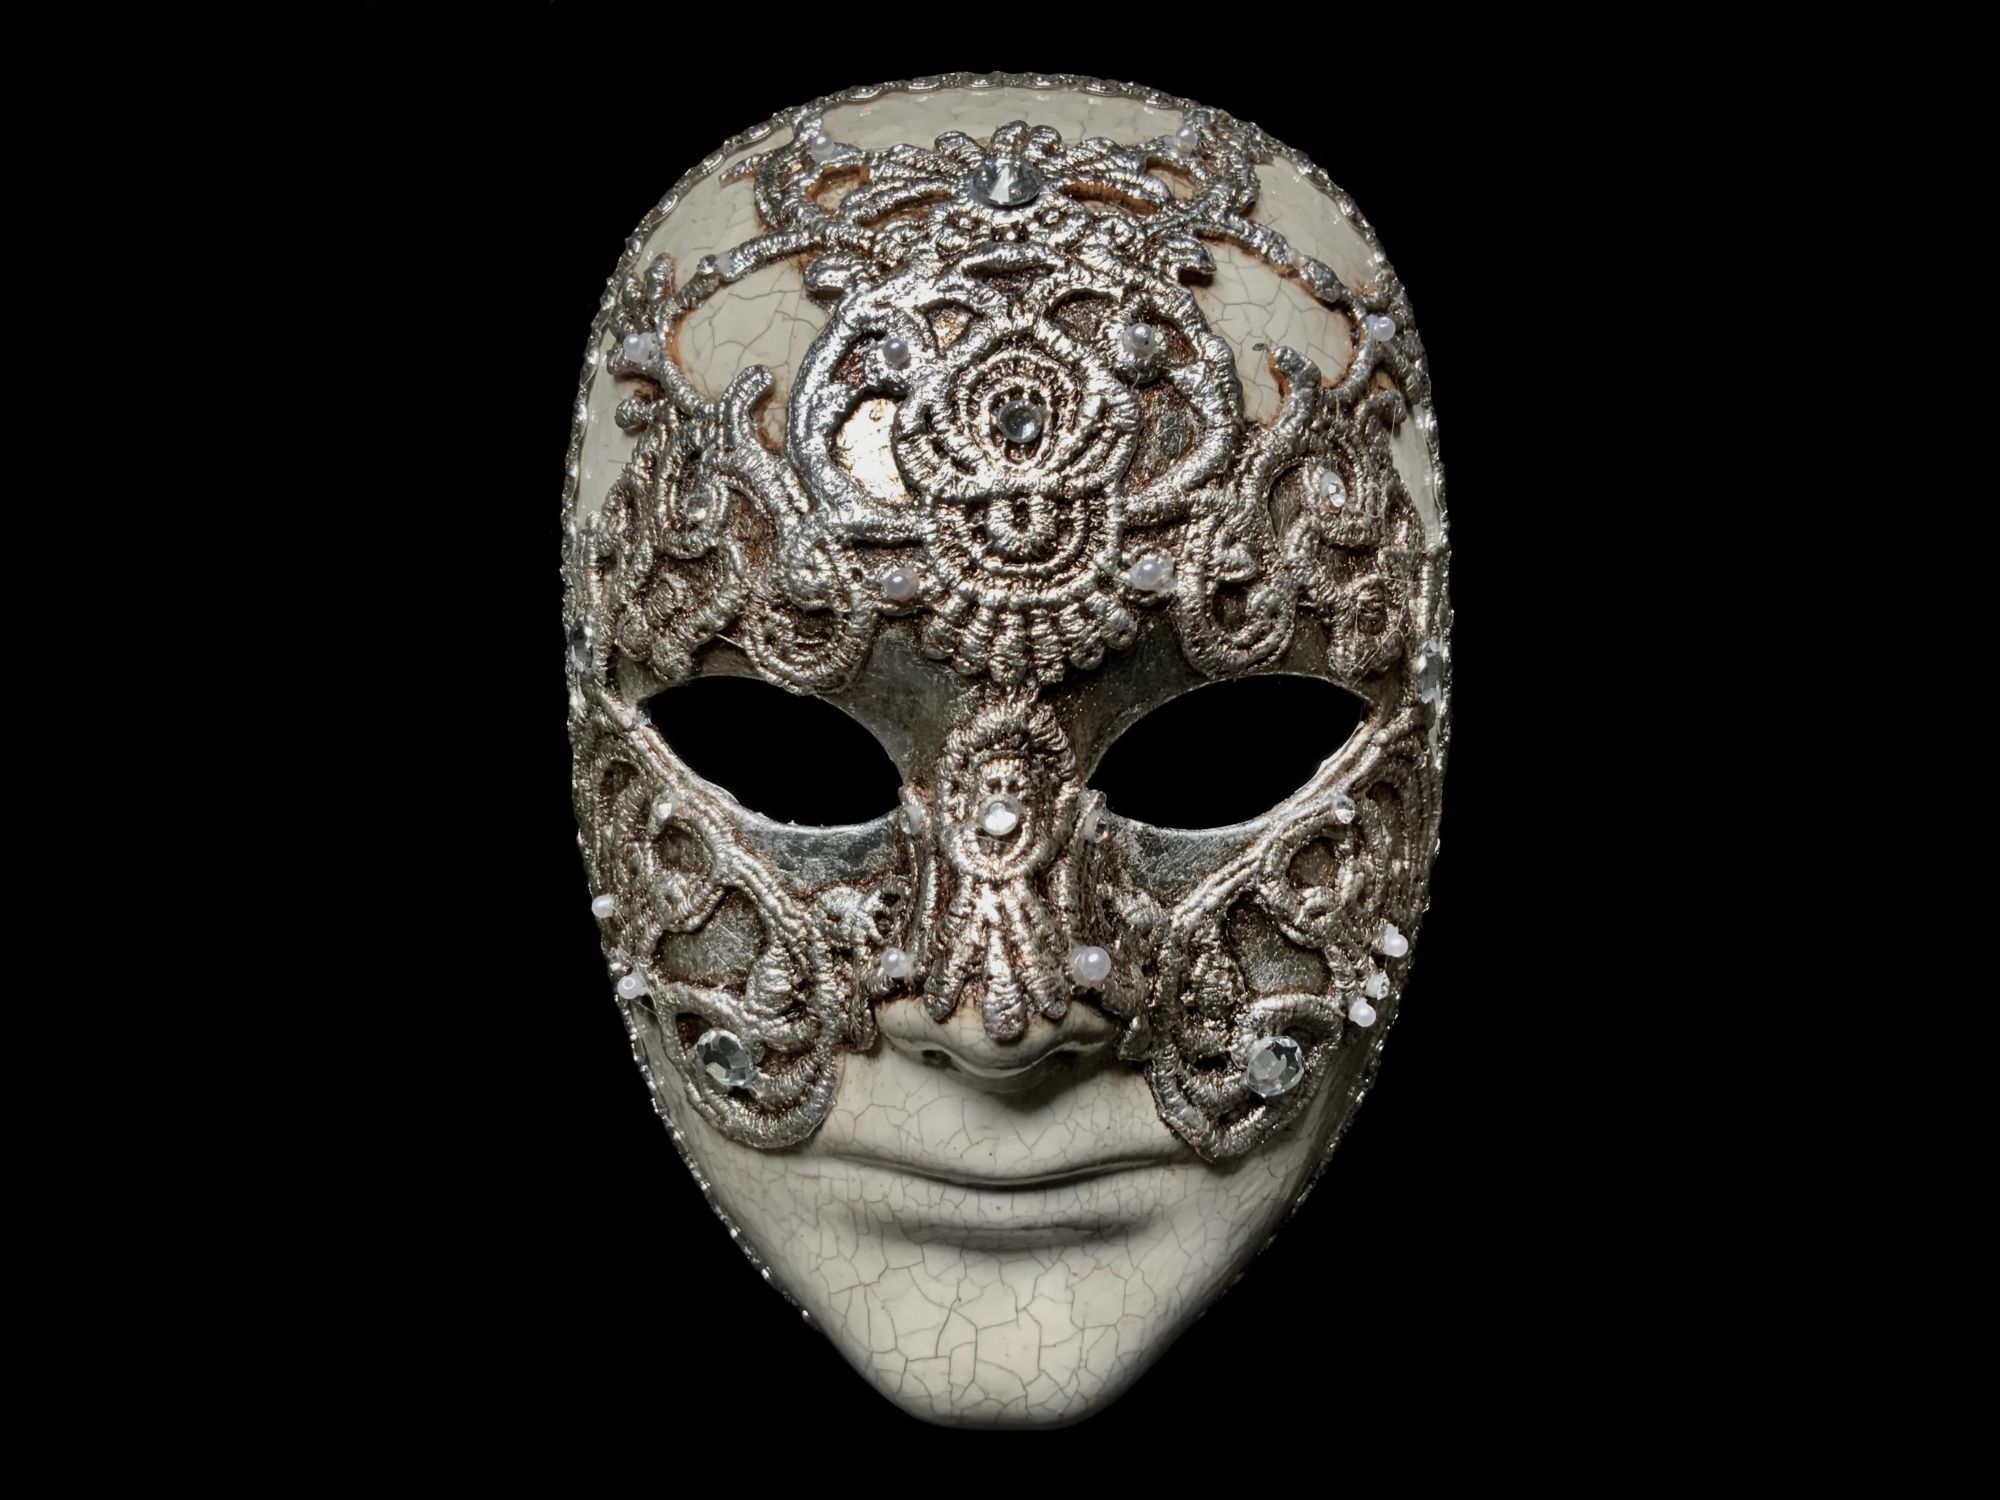 Siver Venetian mask worn by Tom Cruise in the movie Eyes Wide Shut